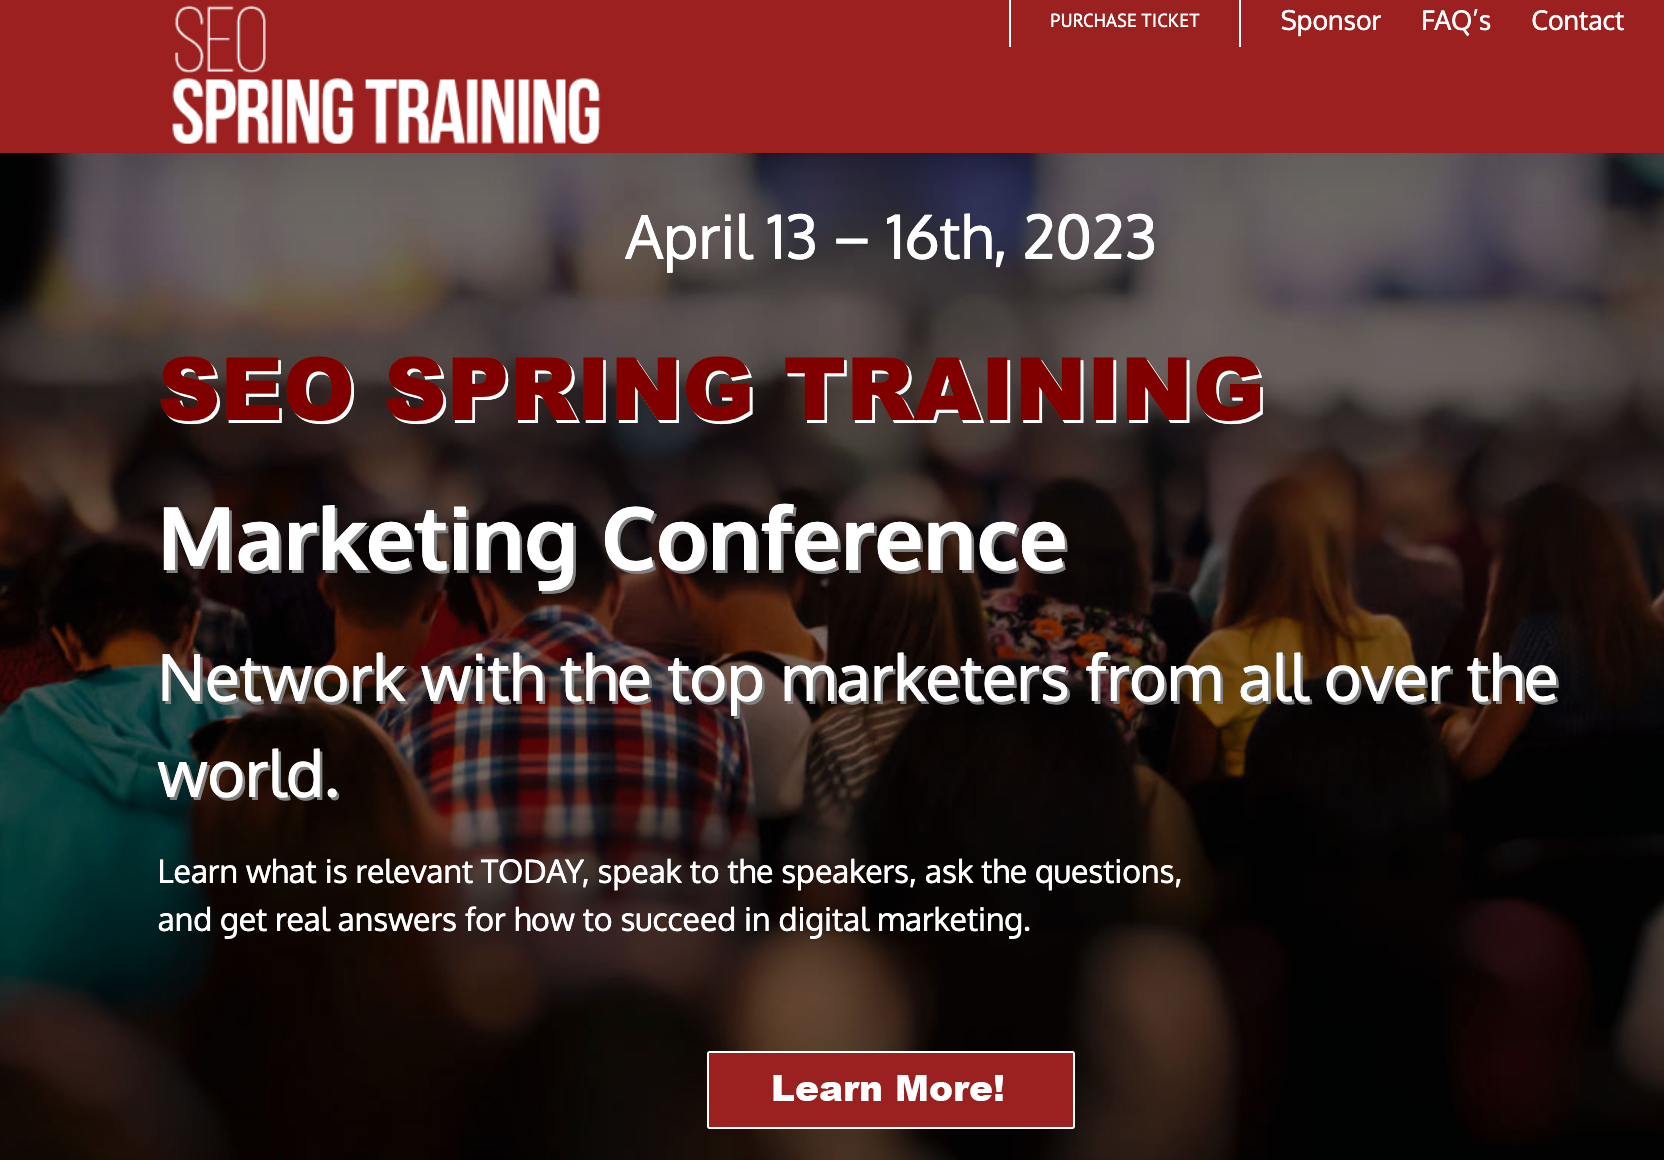 SEO Spring Training Conference